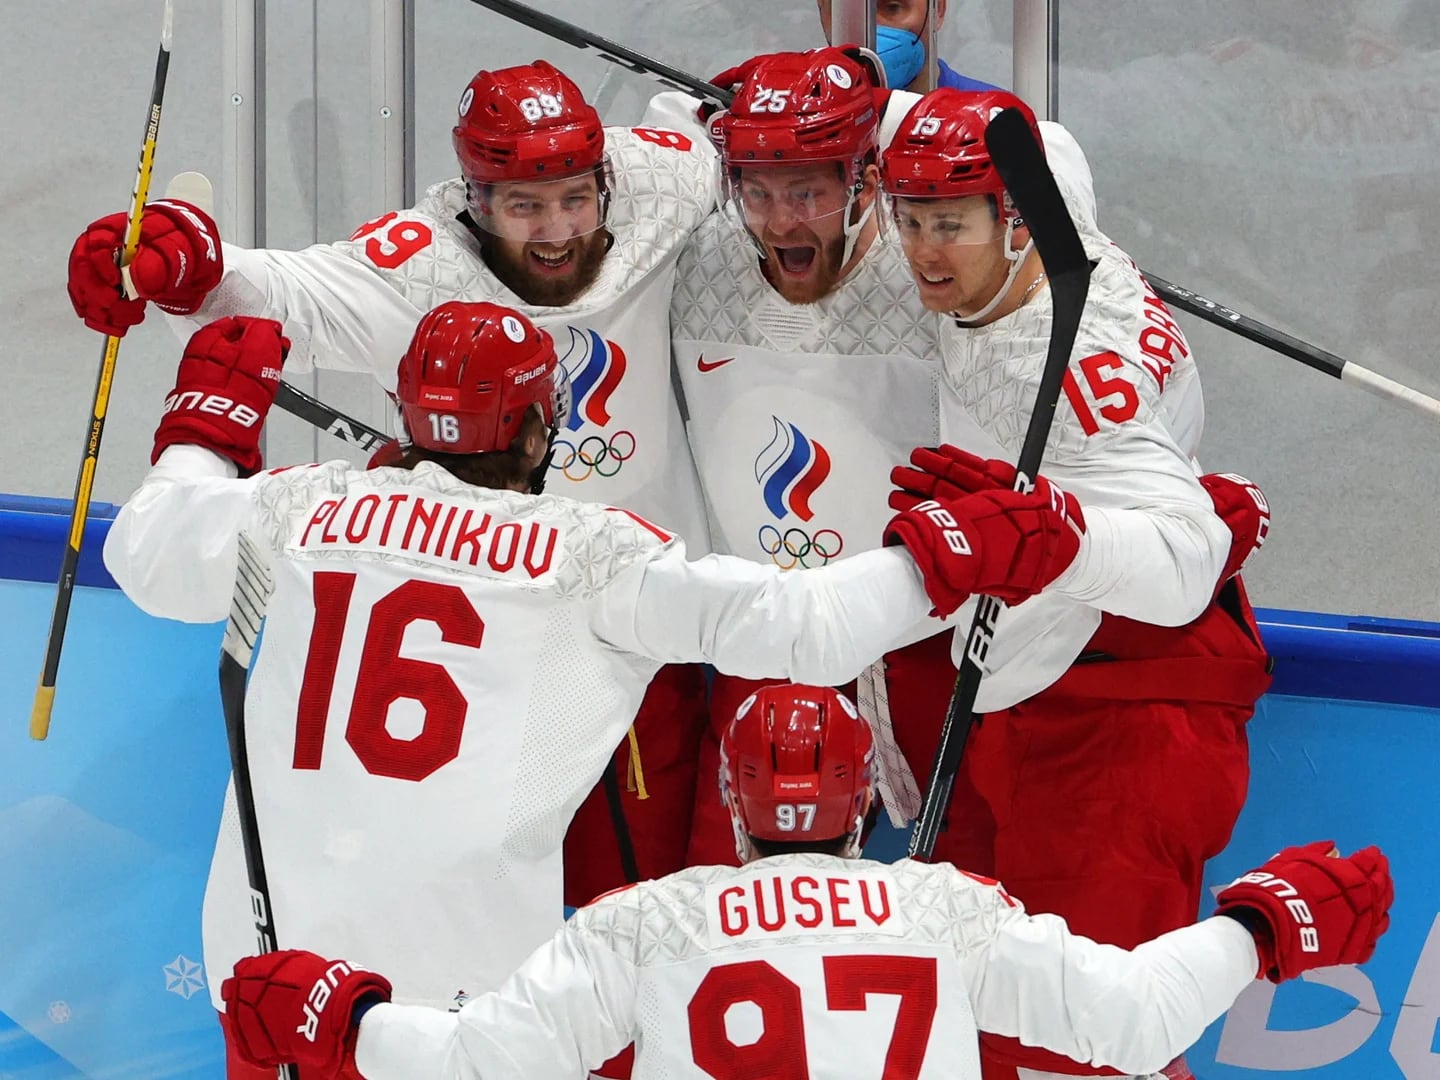 Alex Ovechkin to Be the First Russian Torchbearer for 2014 Sochi